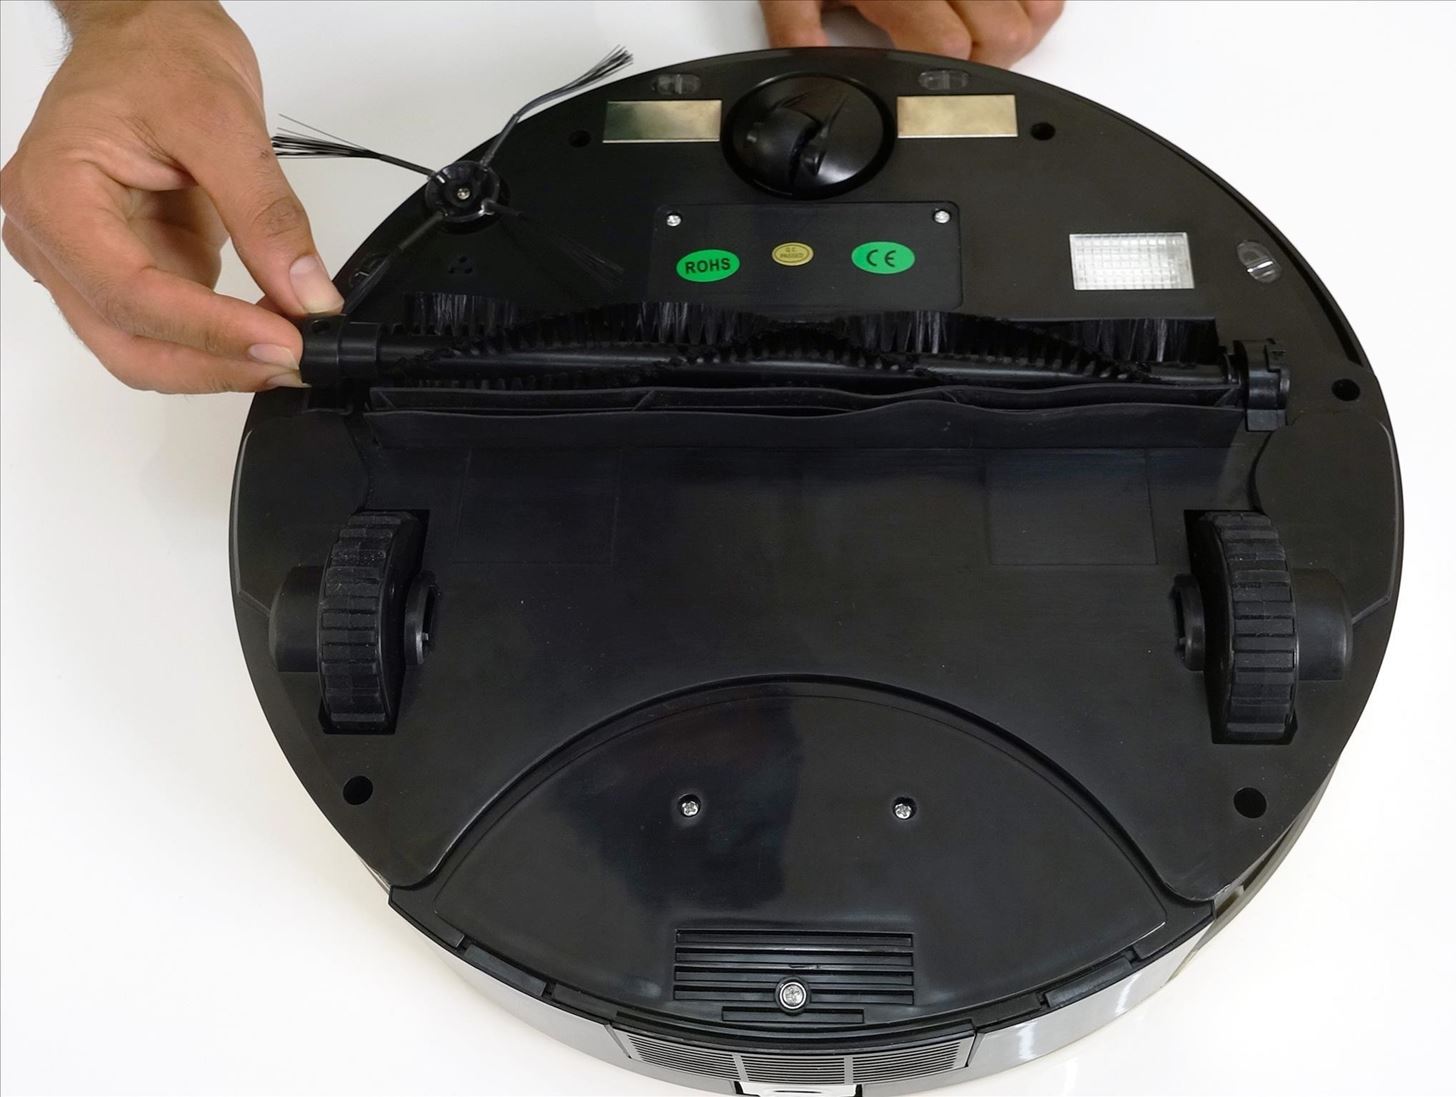 How to Clean a Bobsweep Robot Vacuum